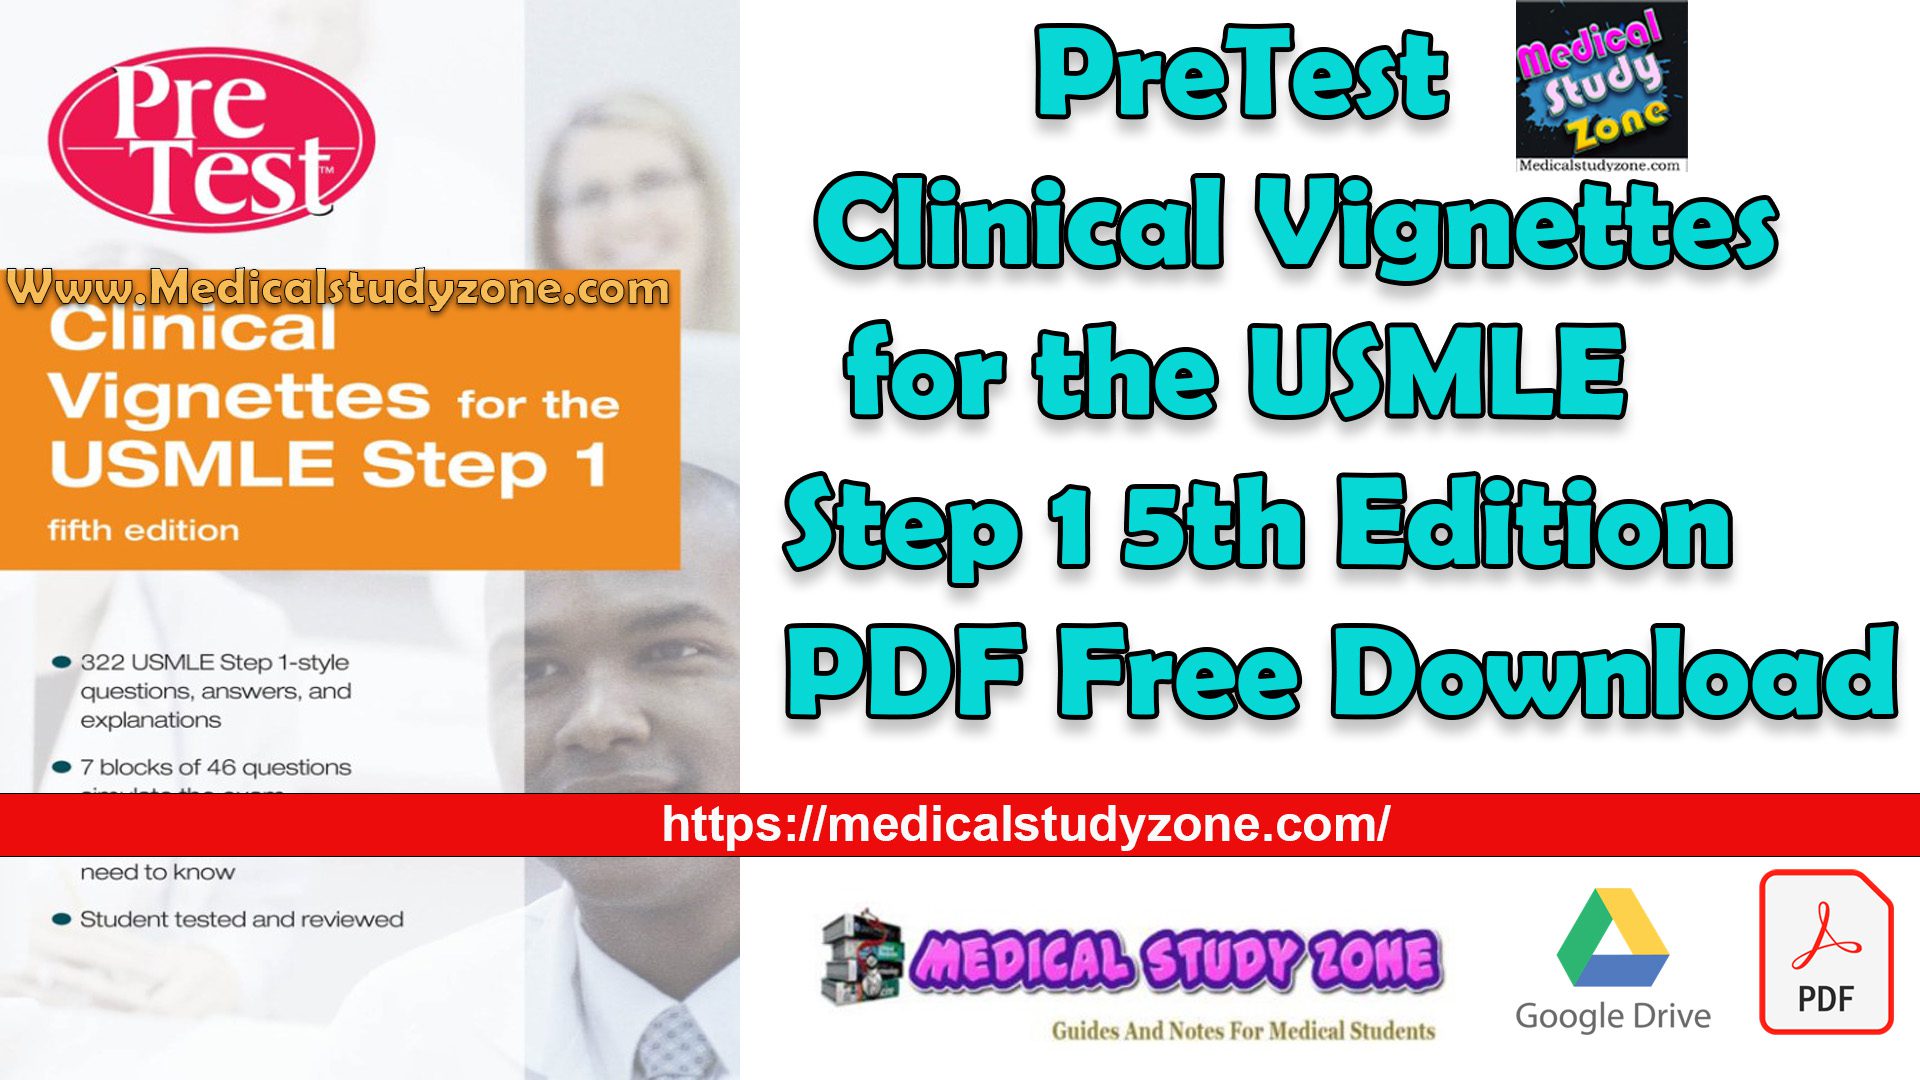 PreTest Clinical Vignettes for the USMLE Step 1 5th Edition PDF Free Download